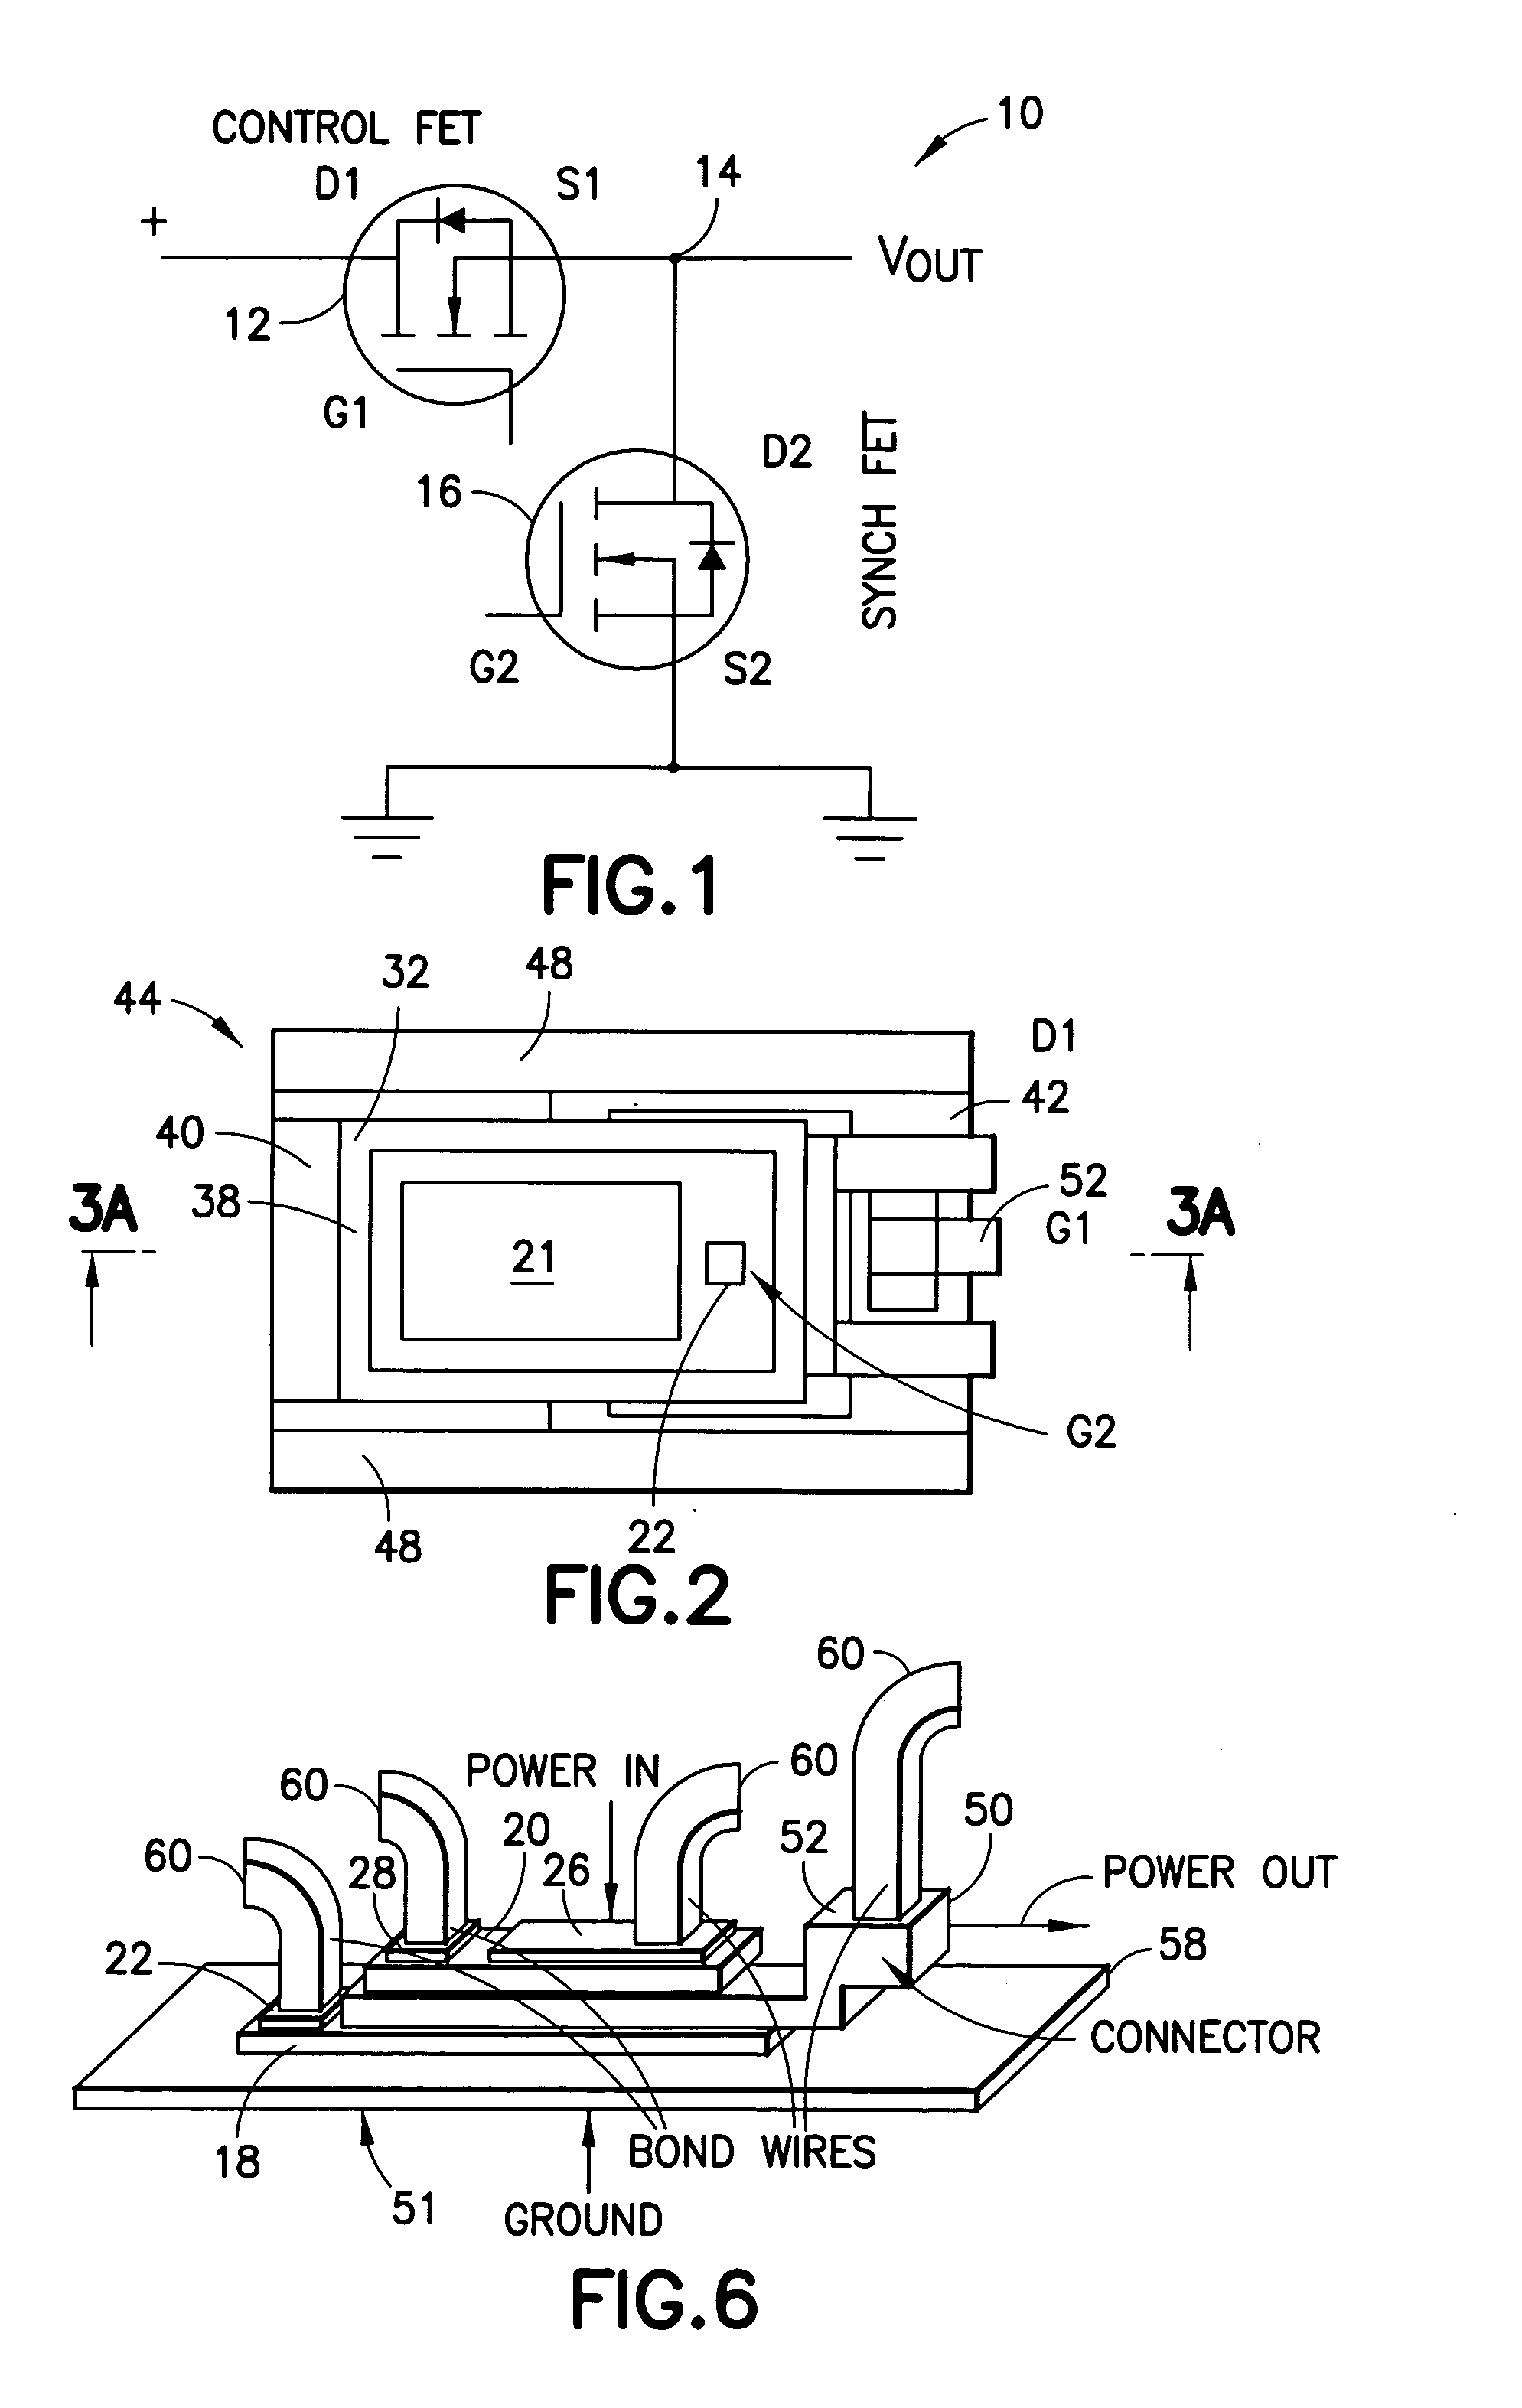 Semiconductor package that includes stacked semiconductor die